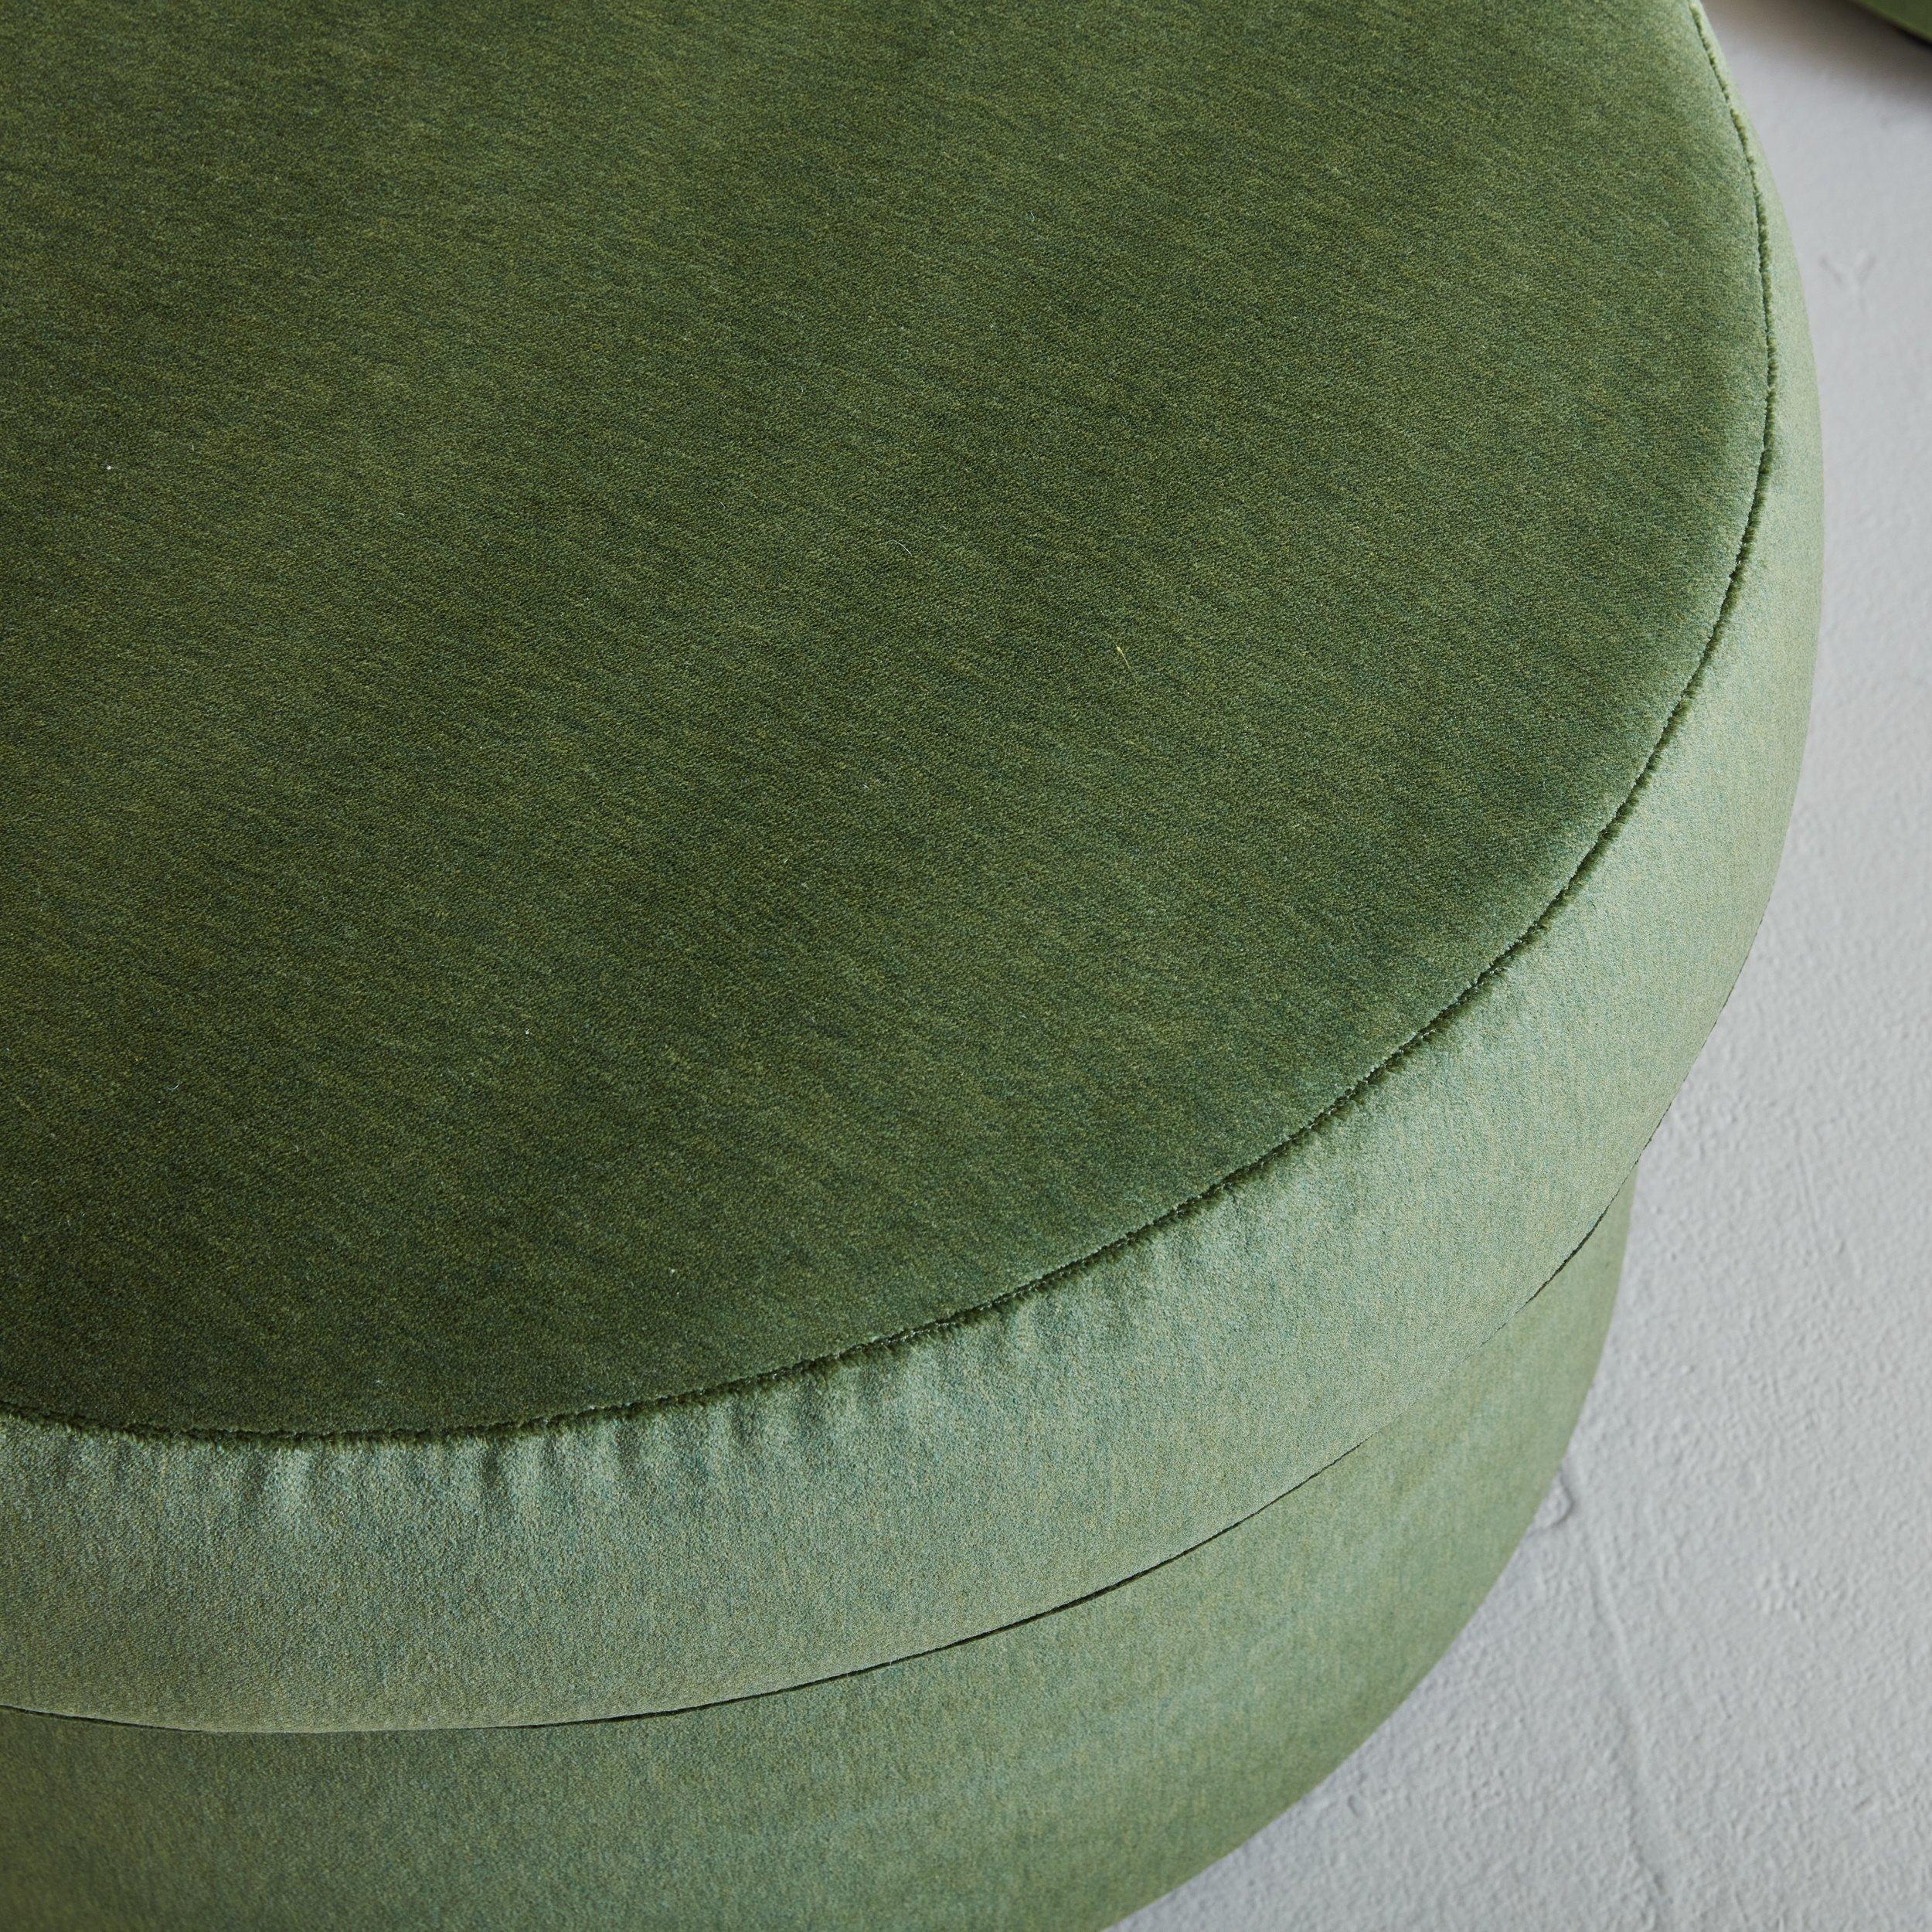 Pair of Round Ottomans in Sage Green Velvet, France 1960s For Sale 1